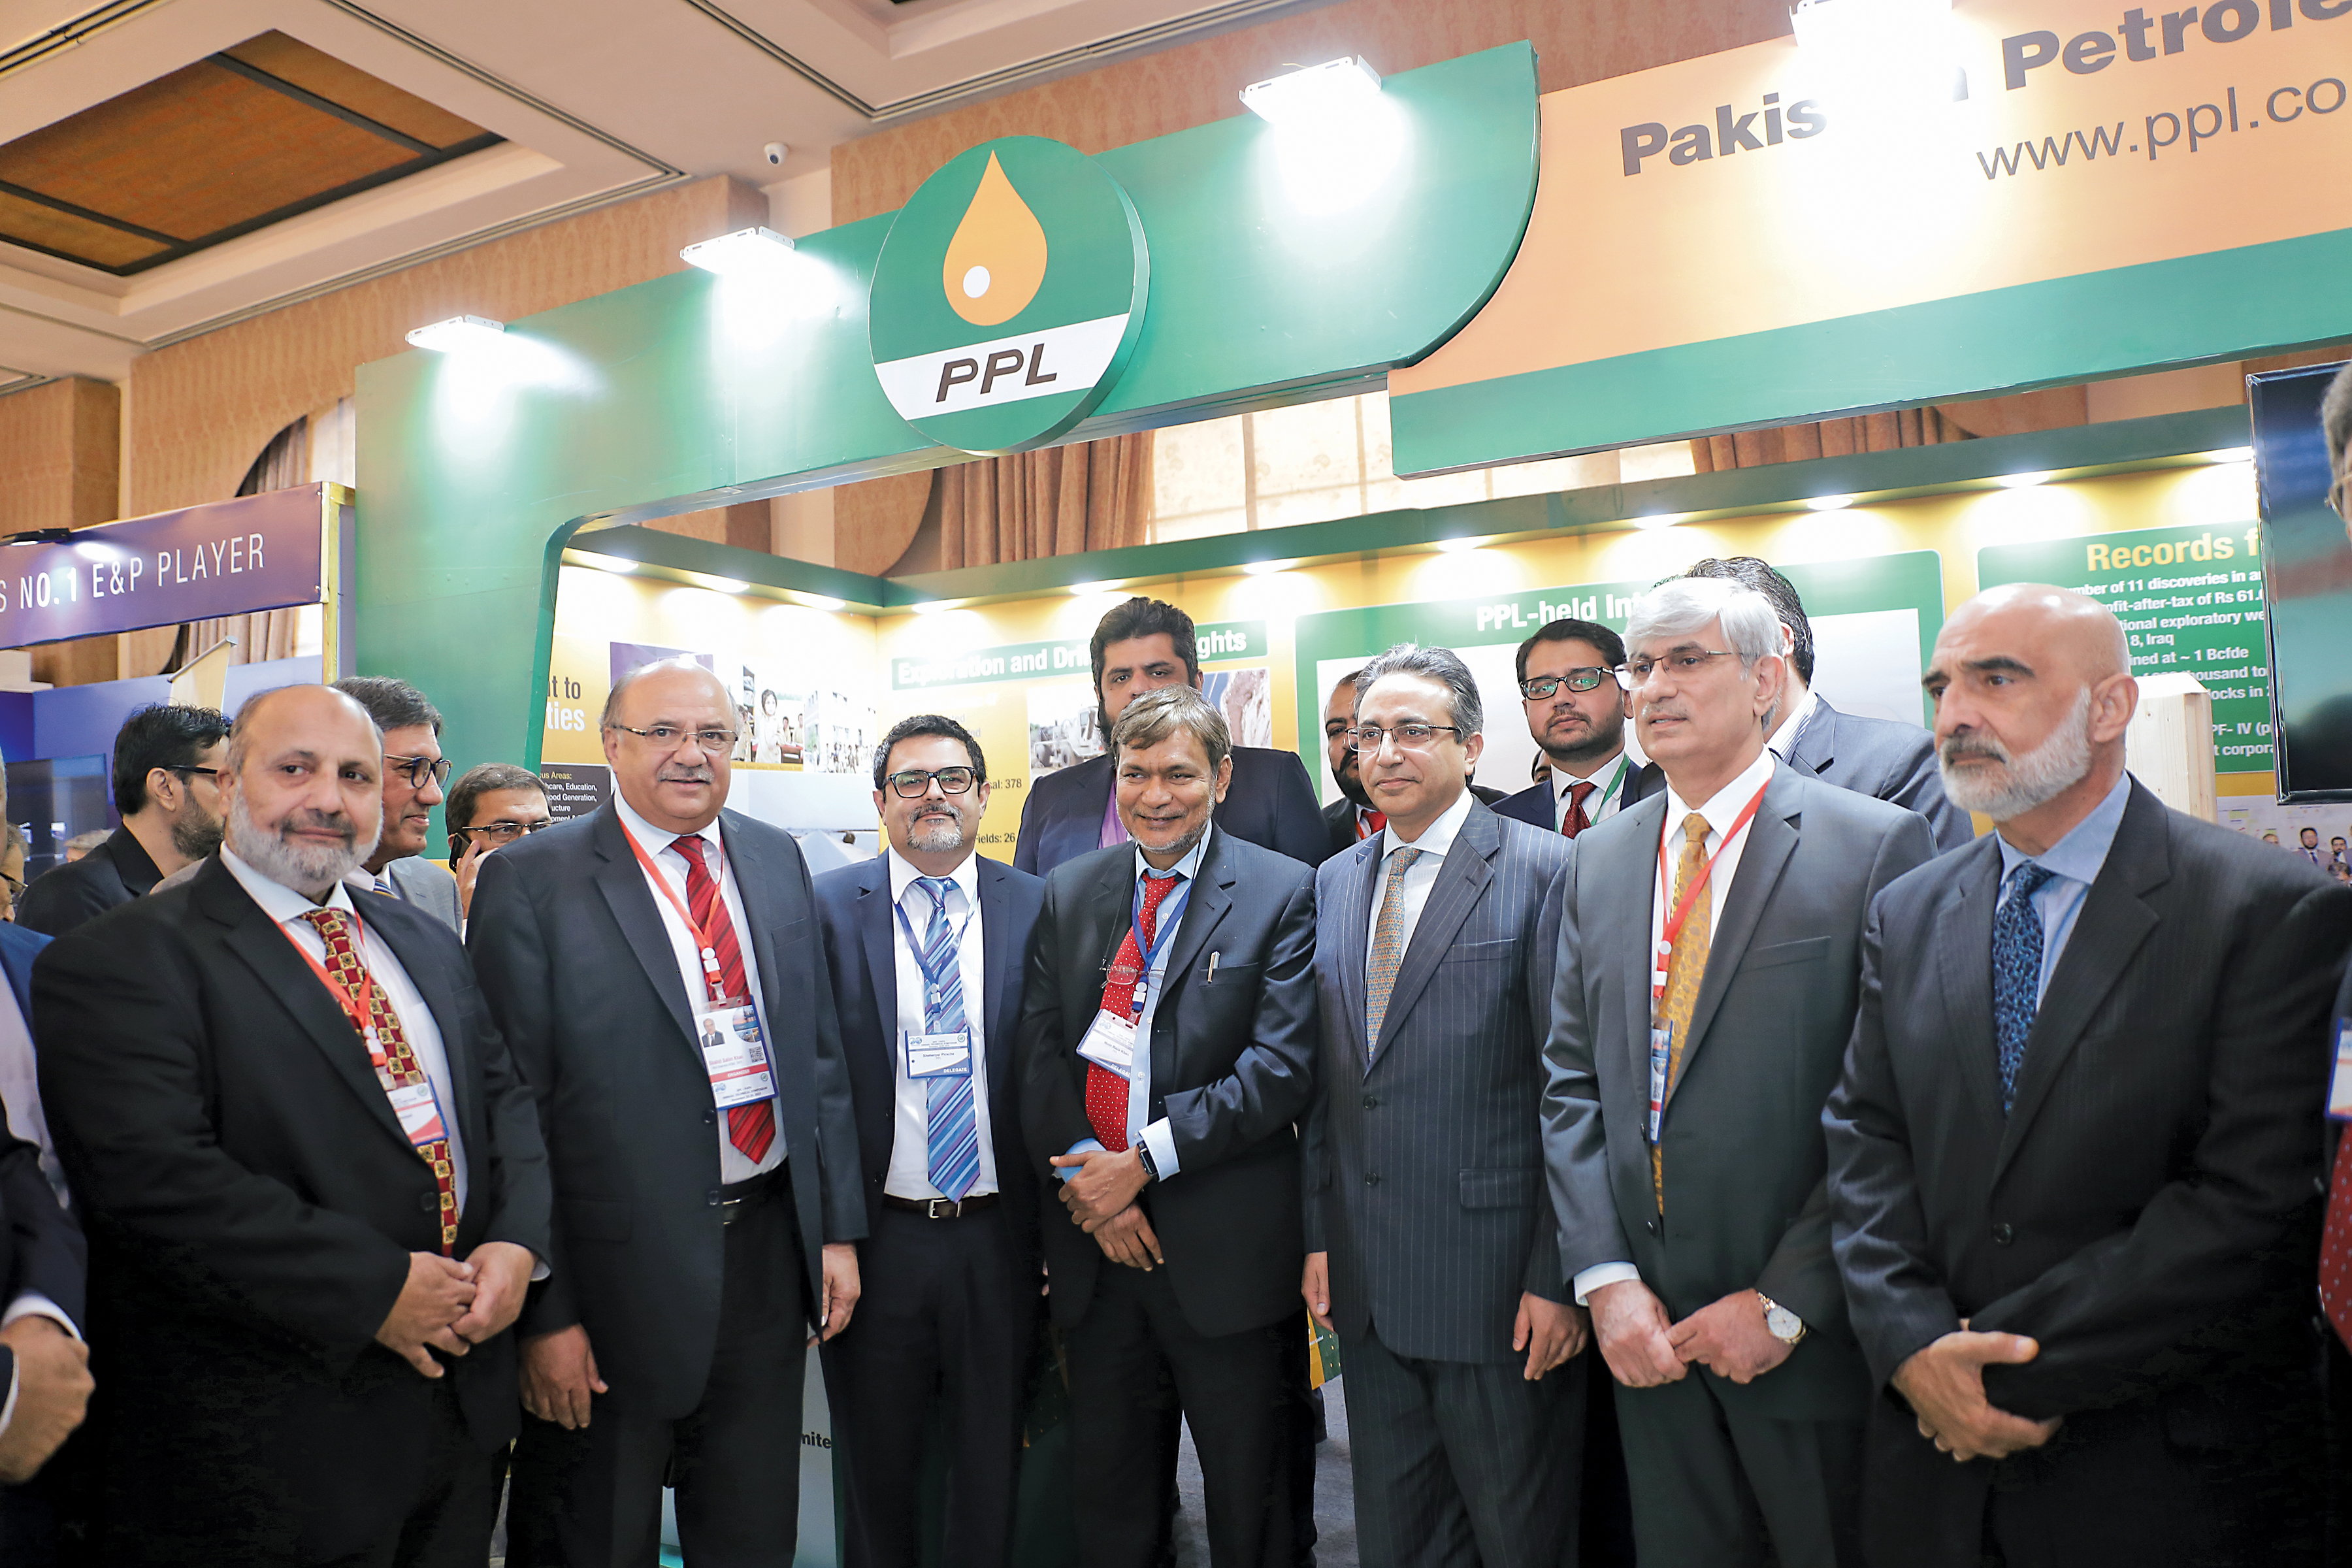 Ministry officials and PPL staff at company’s corporate booth set-up during Annual Technical Symposium & Oil Show 2019